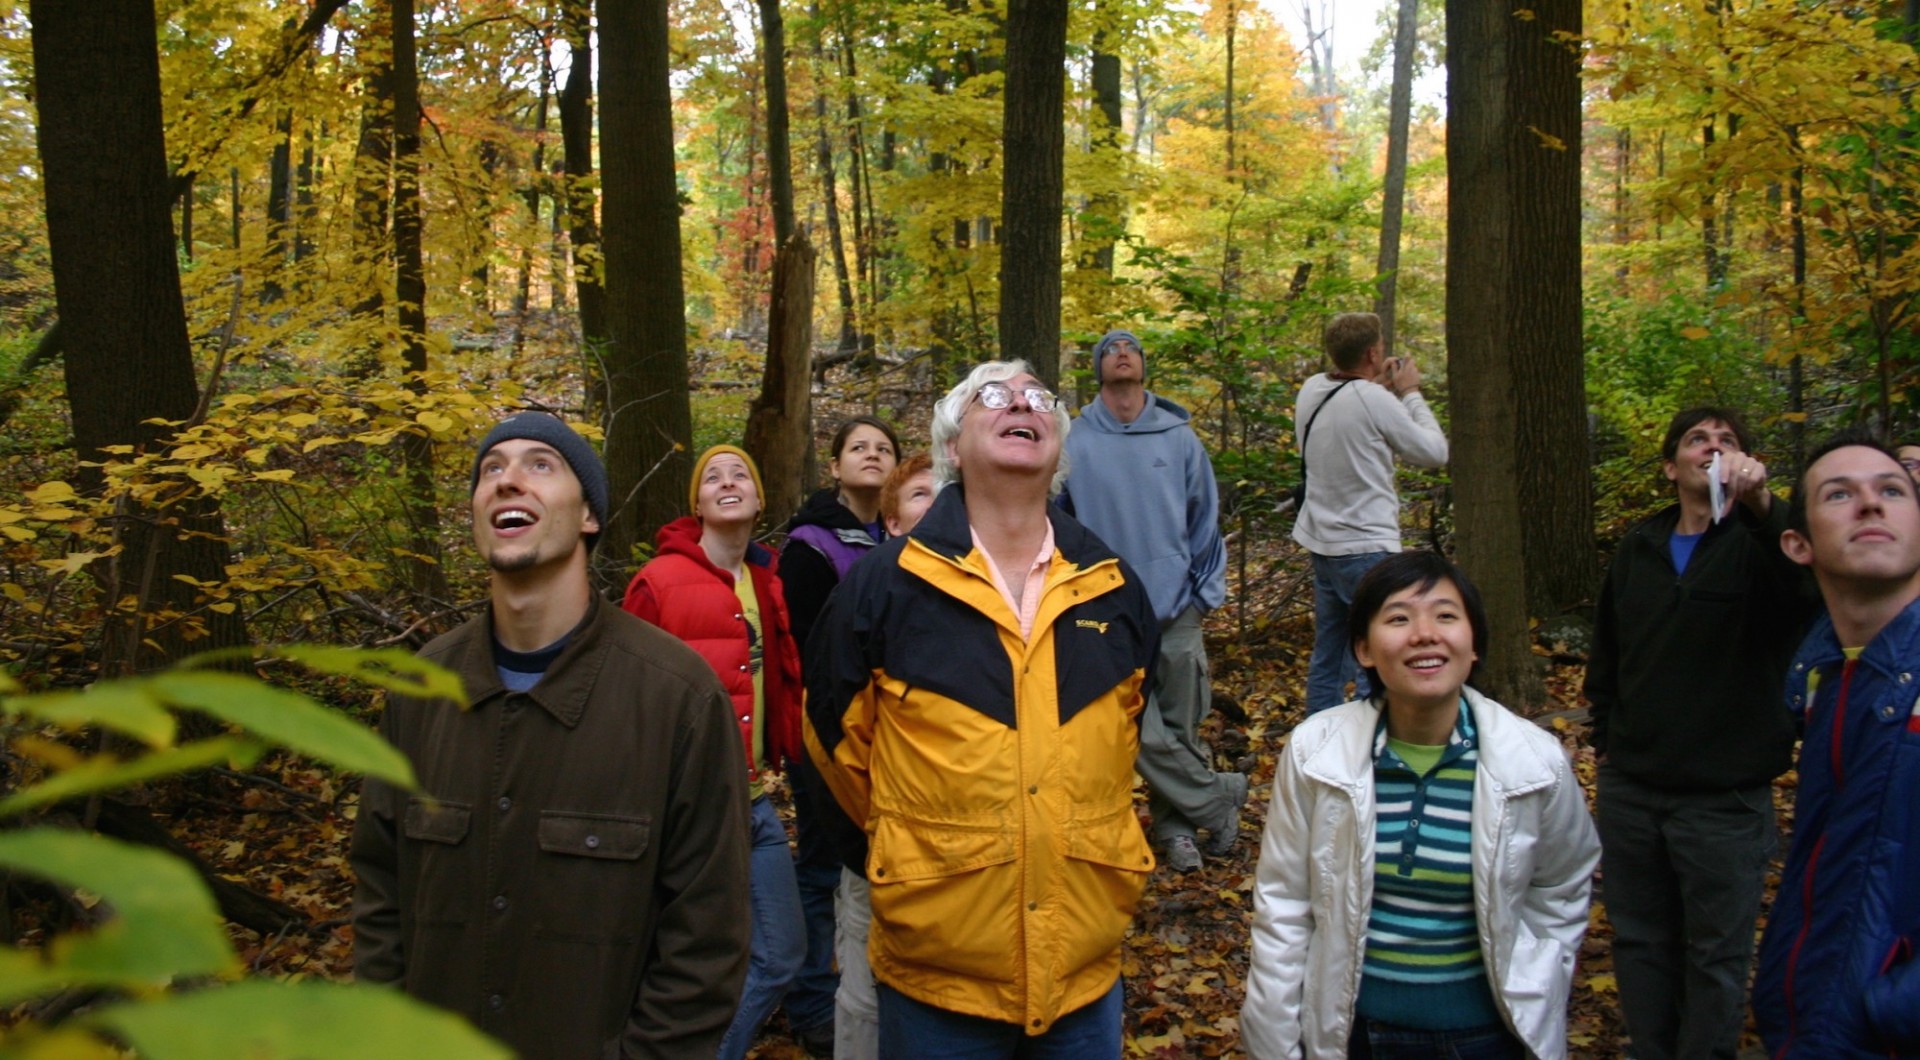 People in forest